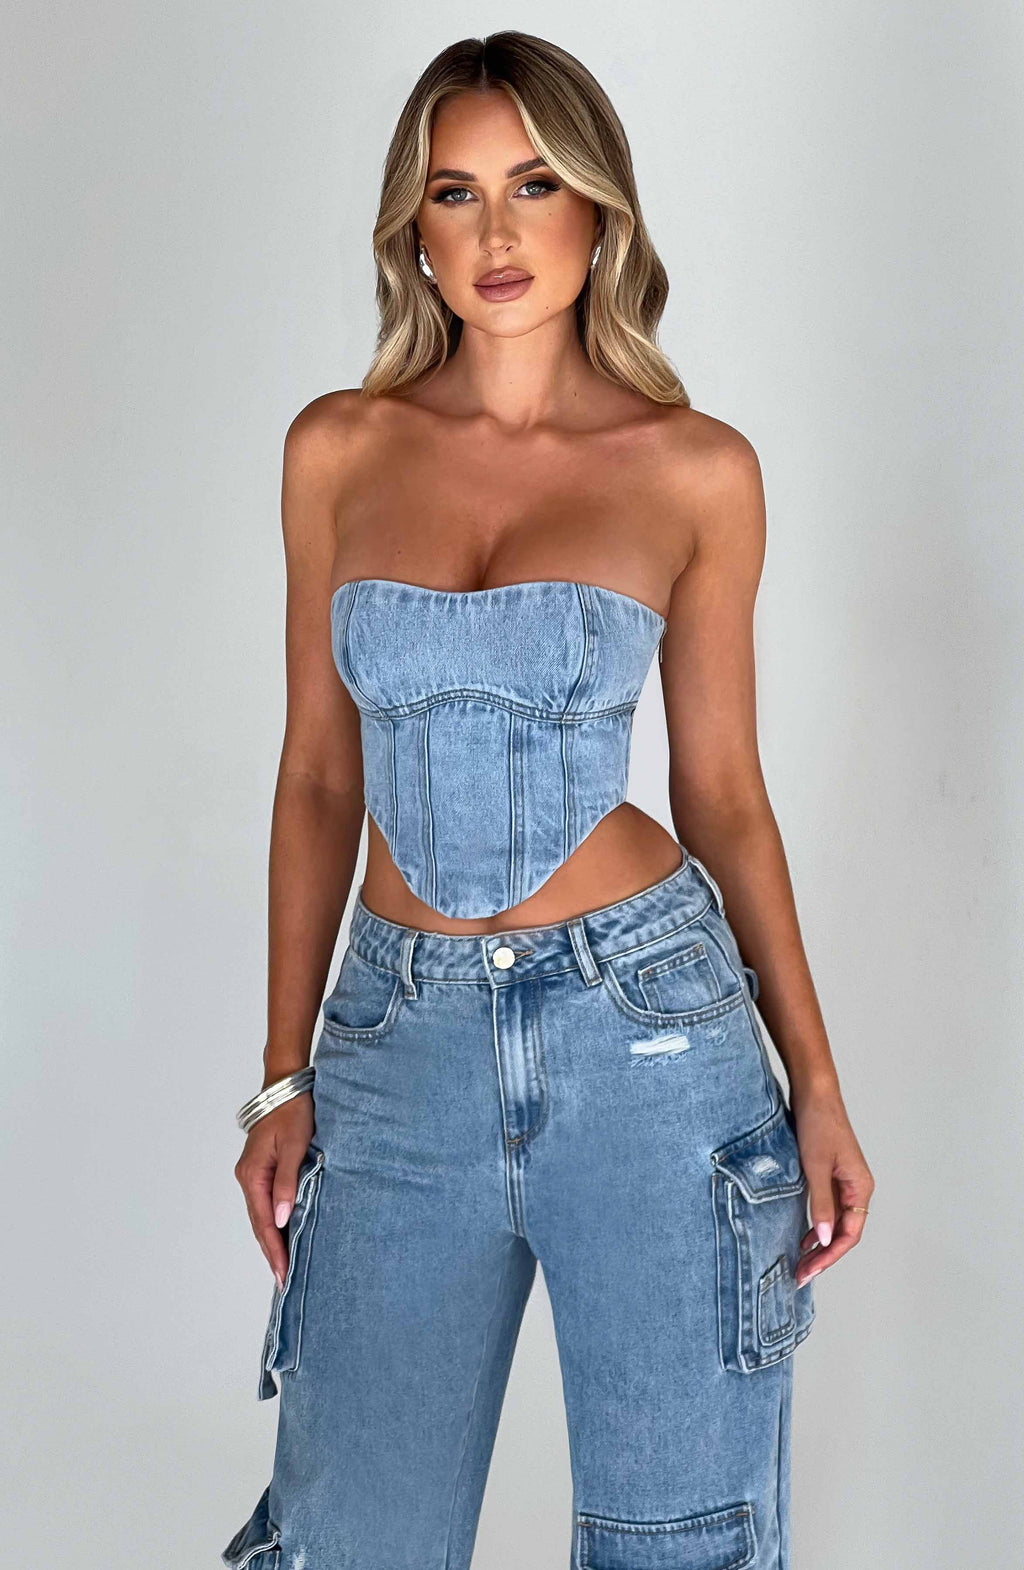 Baby Blue Reworked Spellout Corset Top Size undefined - $67 - From Allison